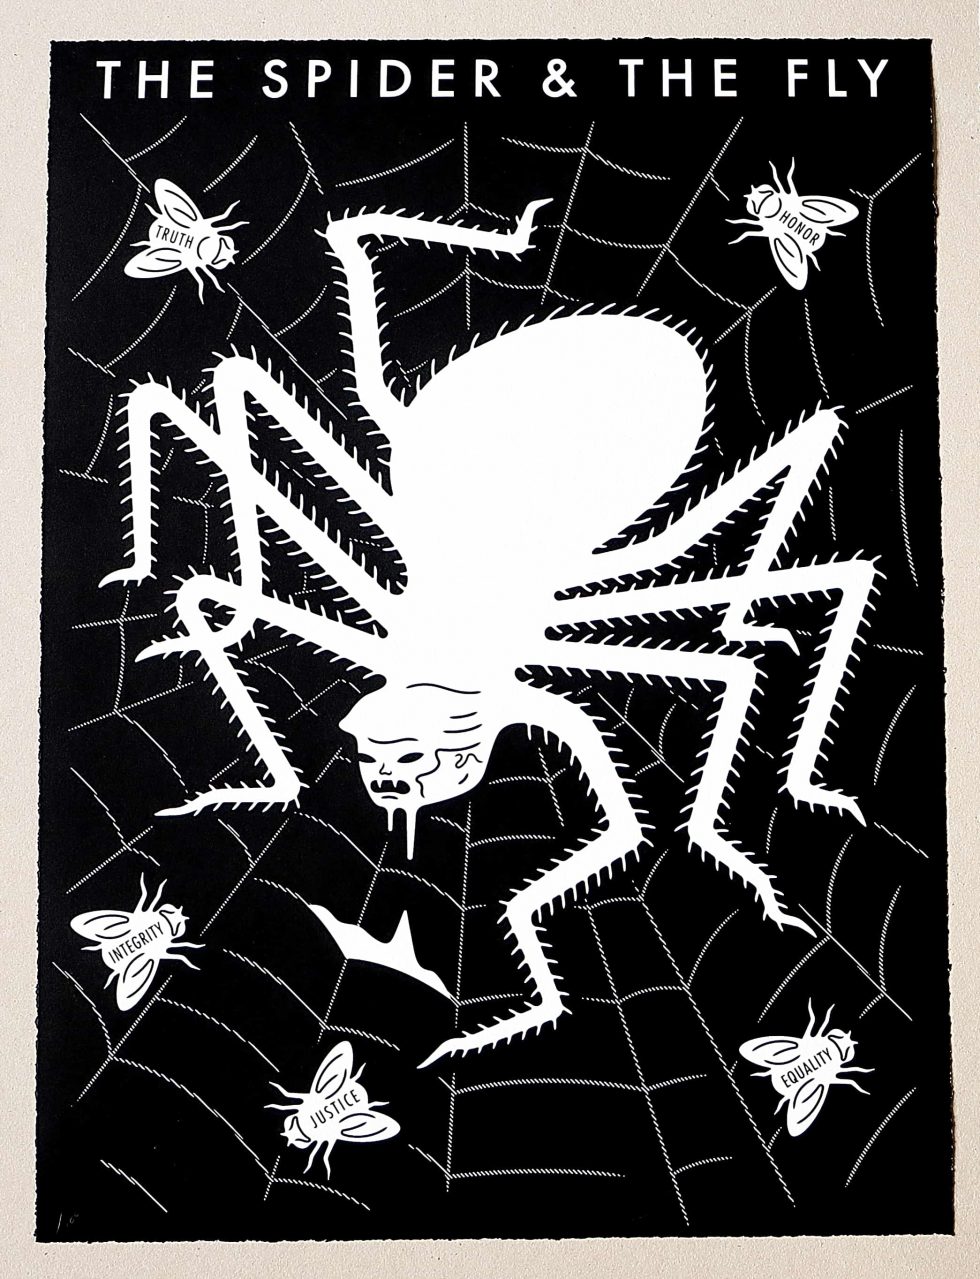 Lot #14908 – Cleon Peterson The Spider & The Fly Screen Print White & Black LTD ED 100 Art Cleon Peterson